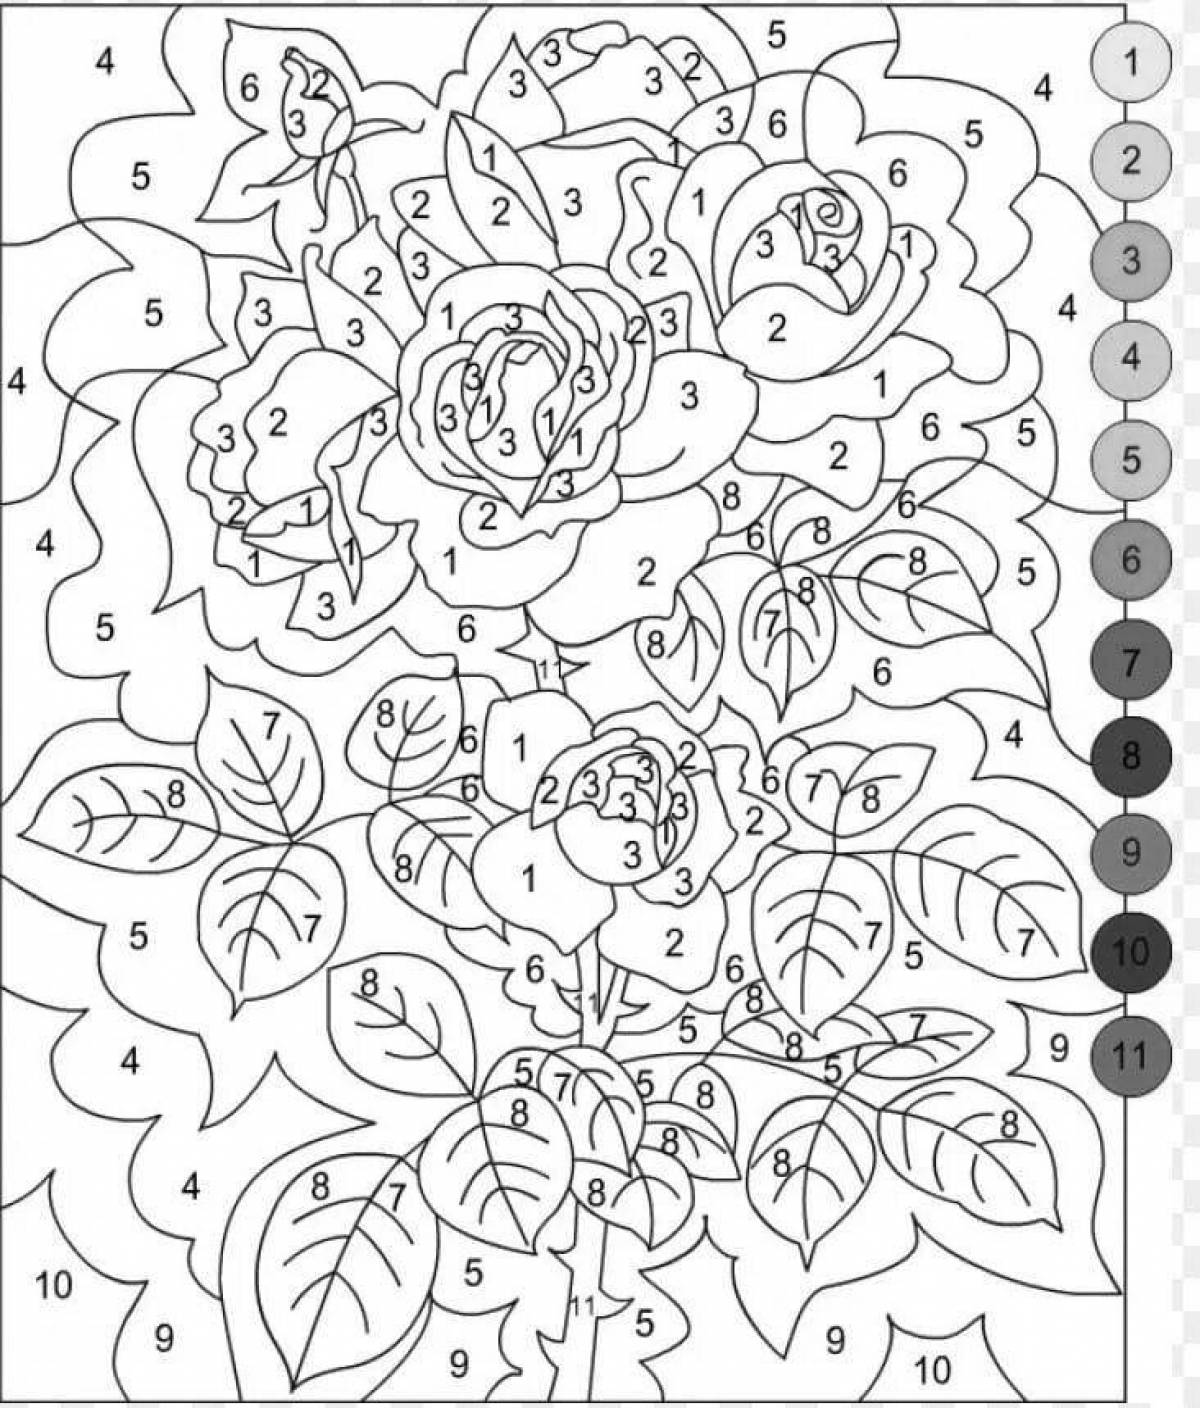 Innovative adult coloring by numbers